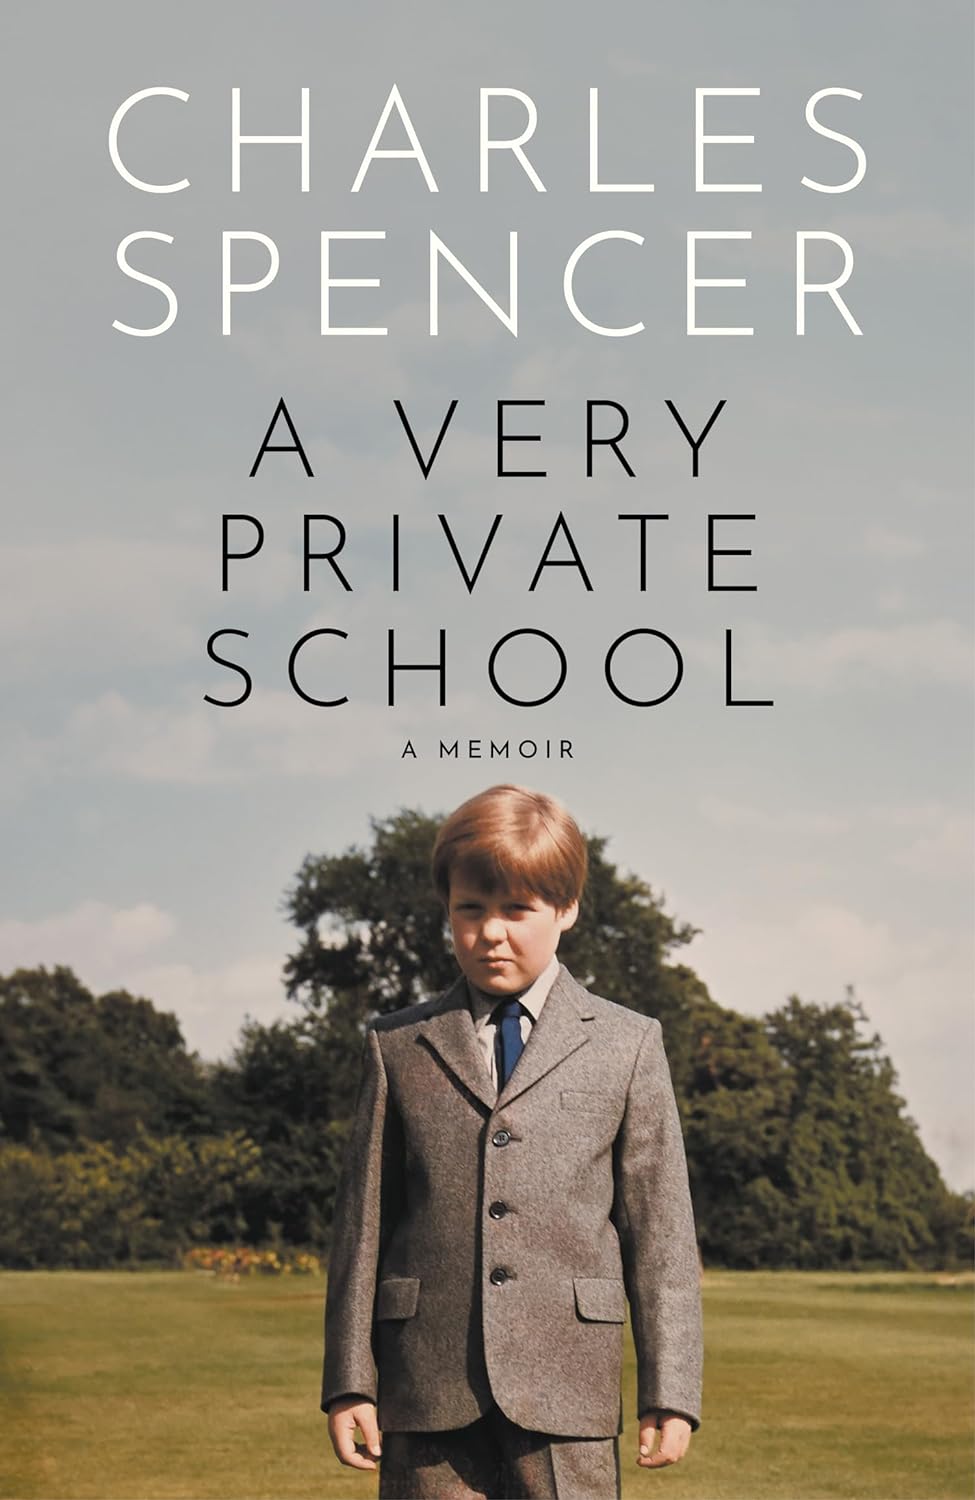 Charles_Spencer_A_Very_private_school_book_cover.